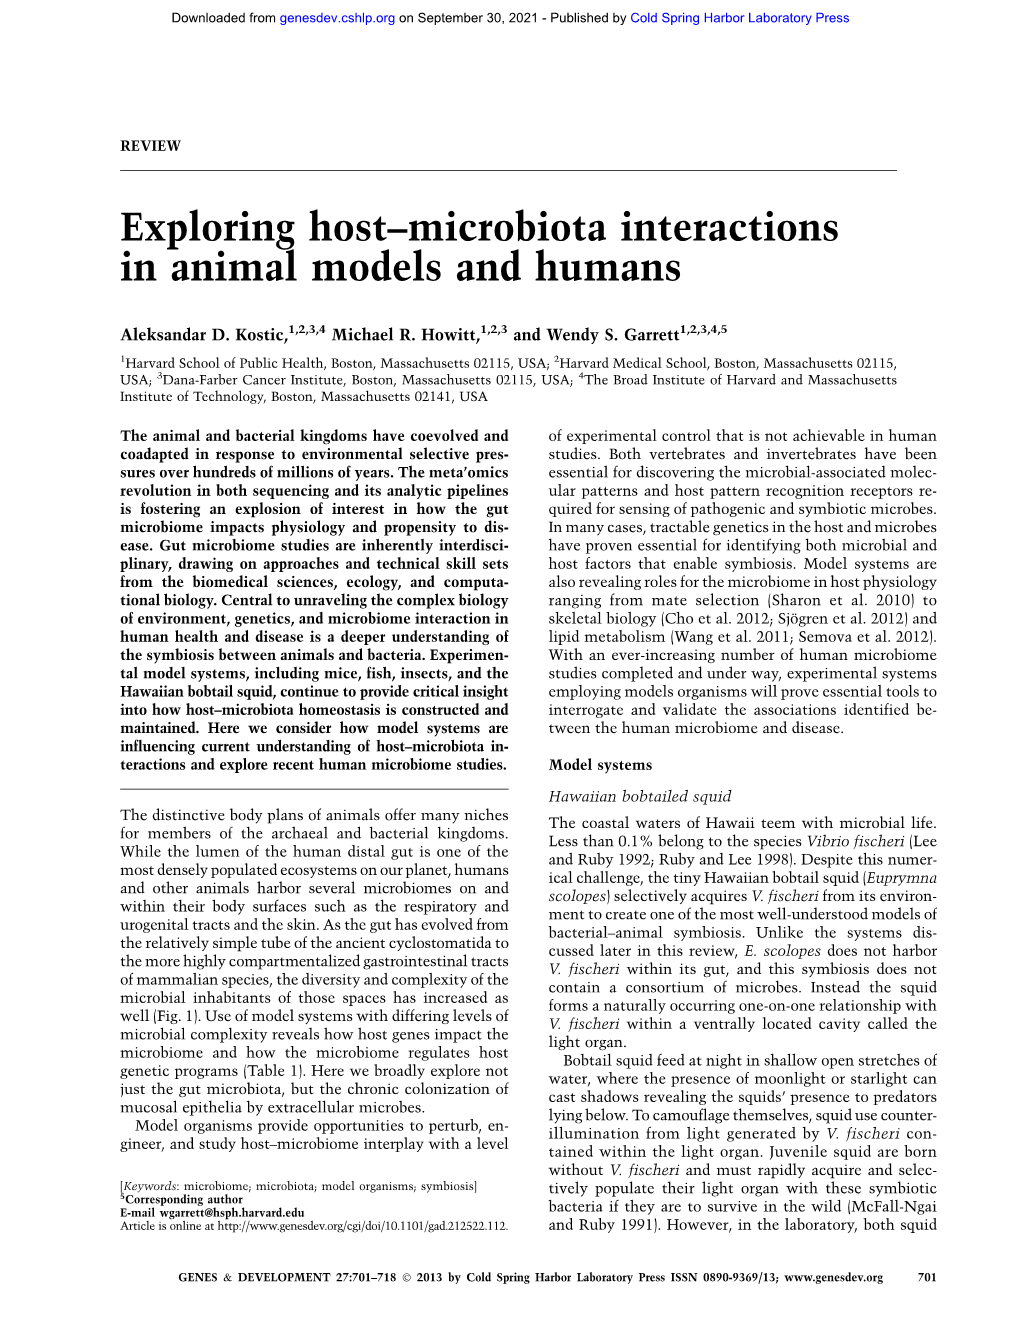 Exploring Host–Microbiota Interactions in Animal Models and Humans